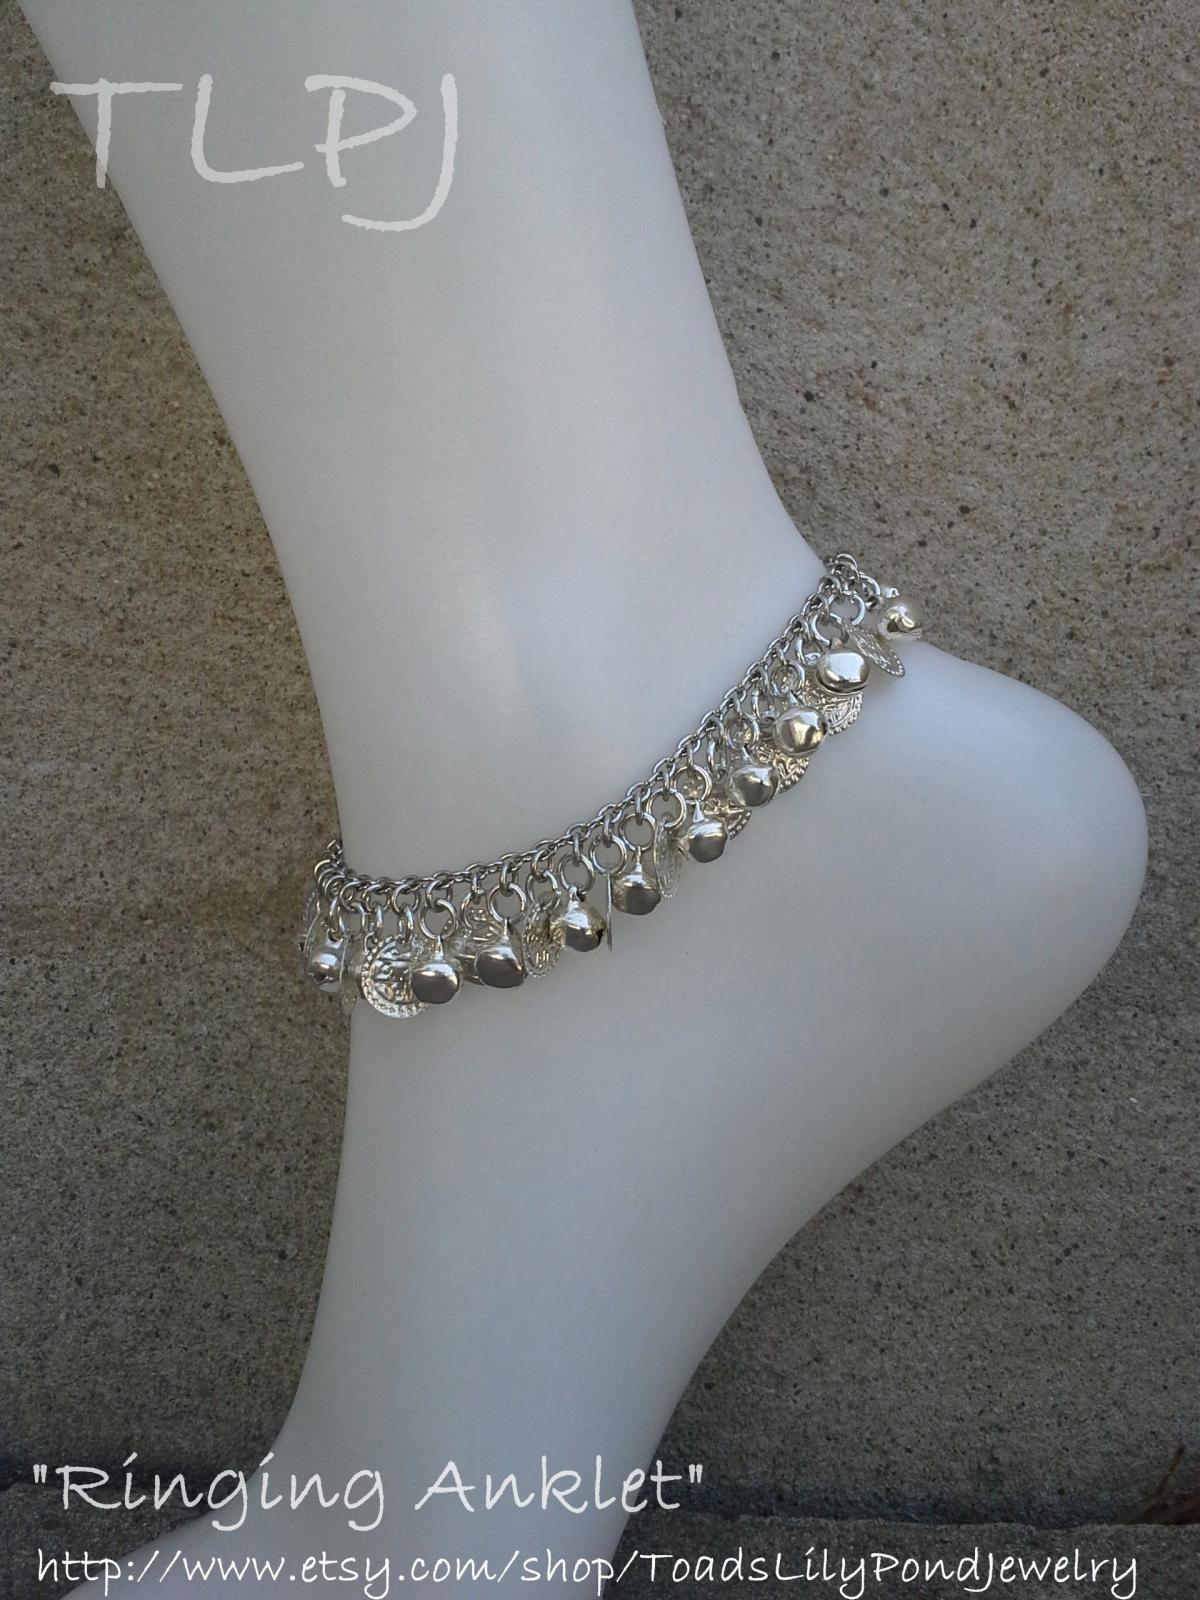 Ankle Bracelet Silver Bell And Coin Charm Anklet On Silver Plated Chain With Toggle Clasp (ringing Anklet)